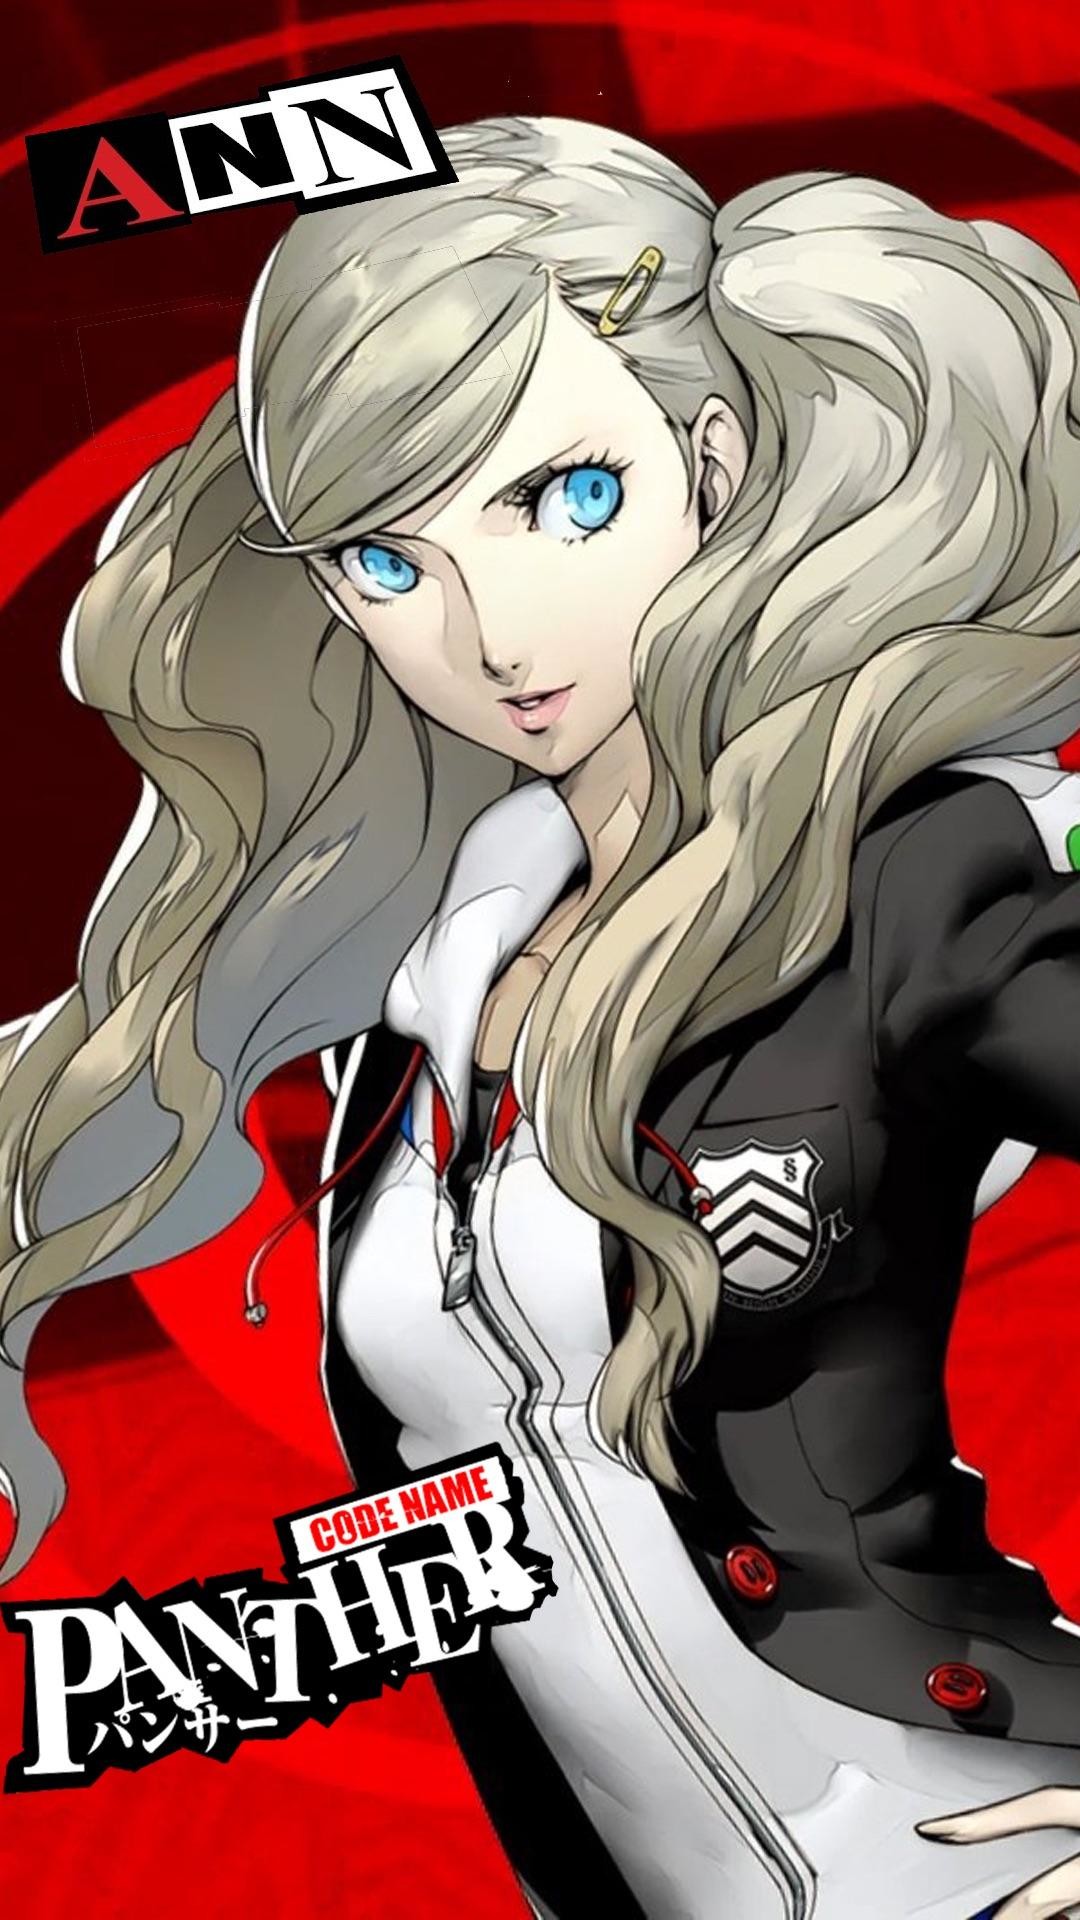 Ann wallpaper I made for iPhone 6/6S/7 plus (1920×1080) Need